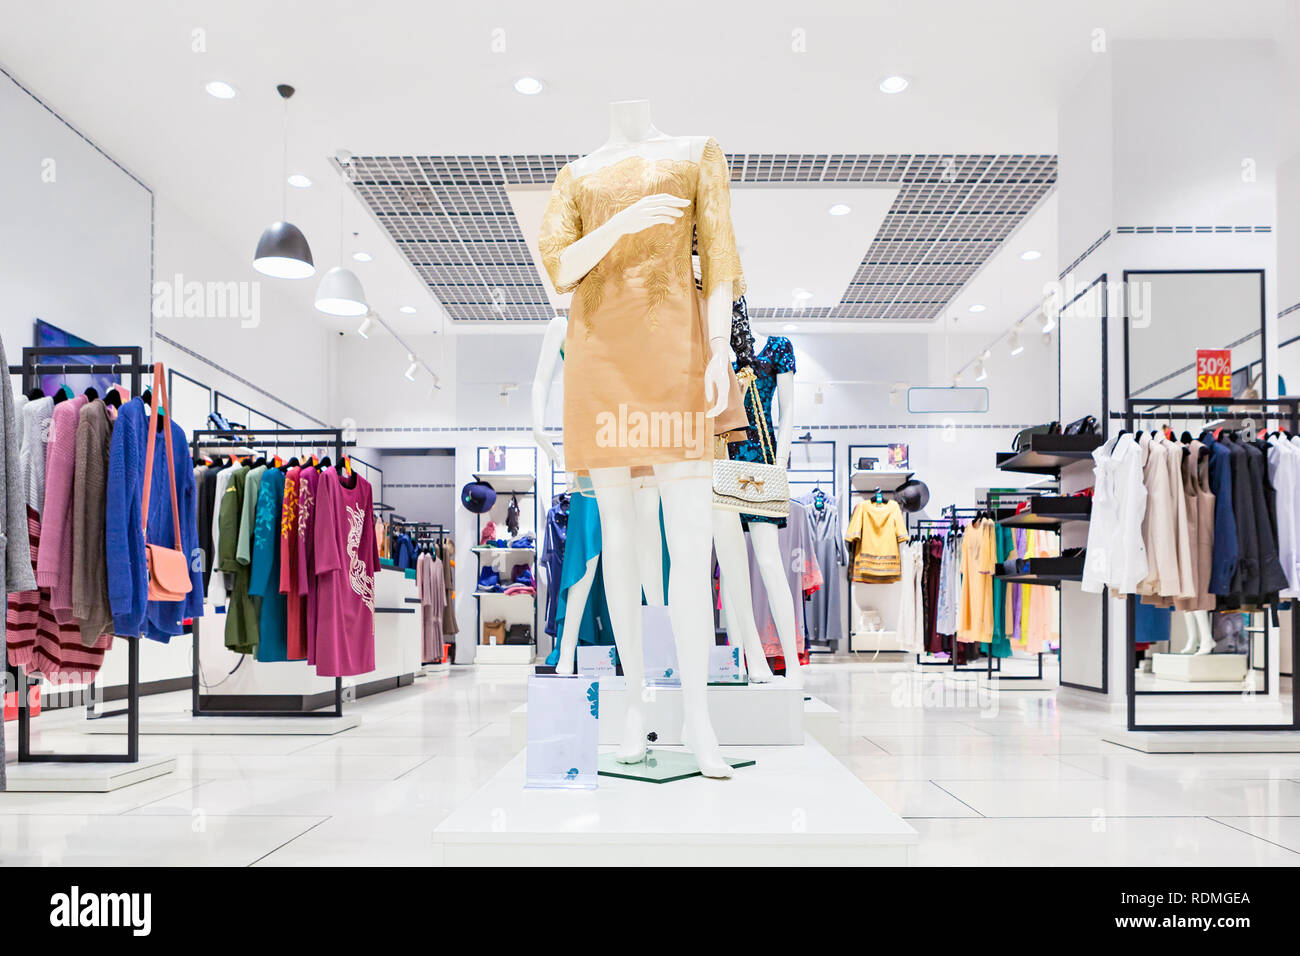 Interior of fashion clothing store for women. Stock Photo